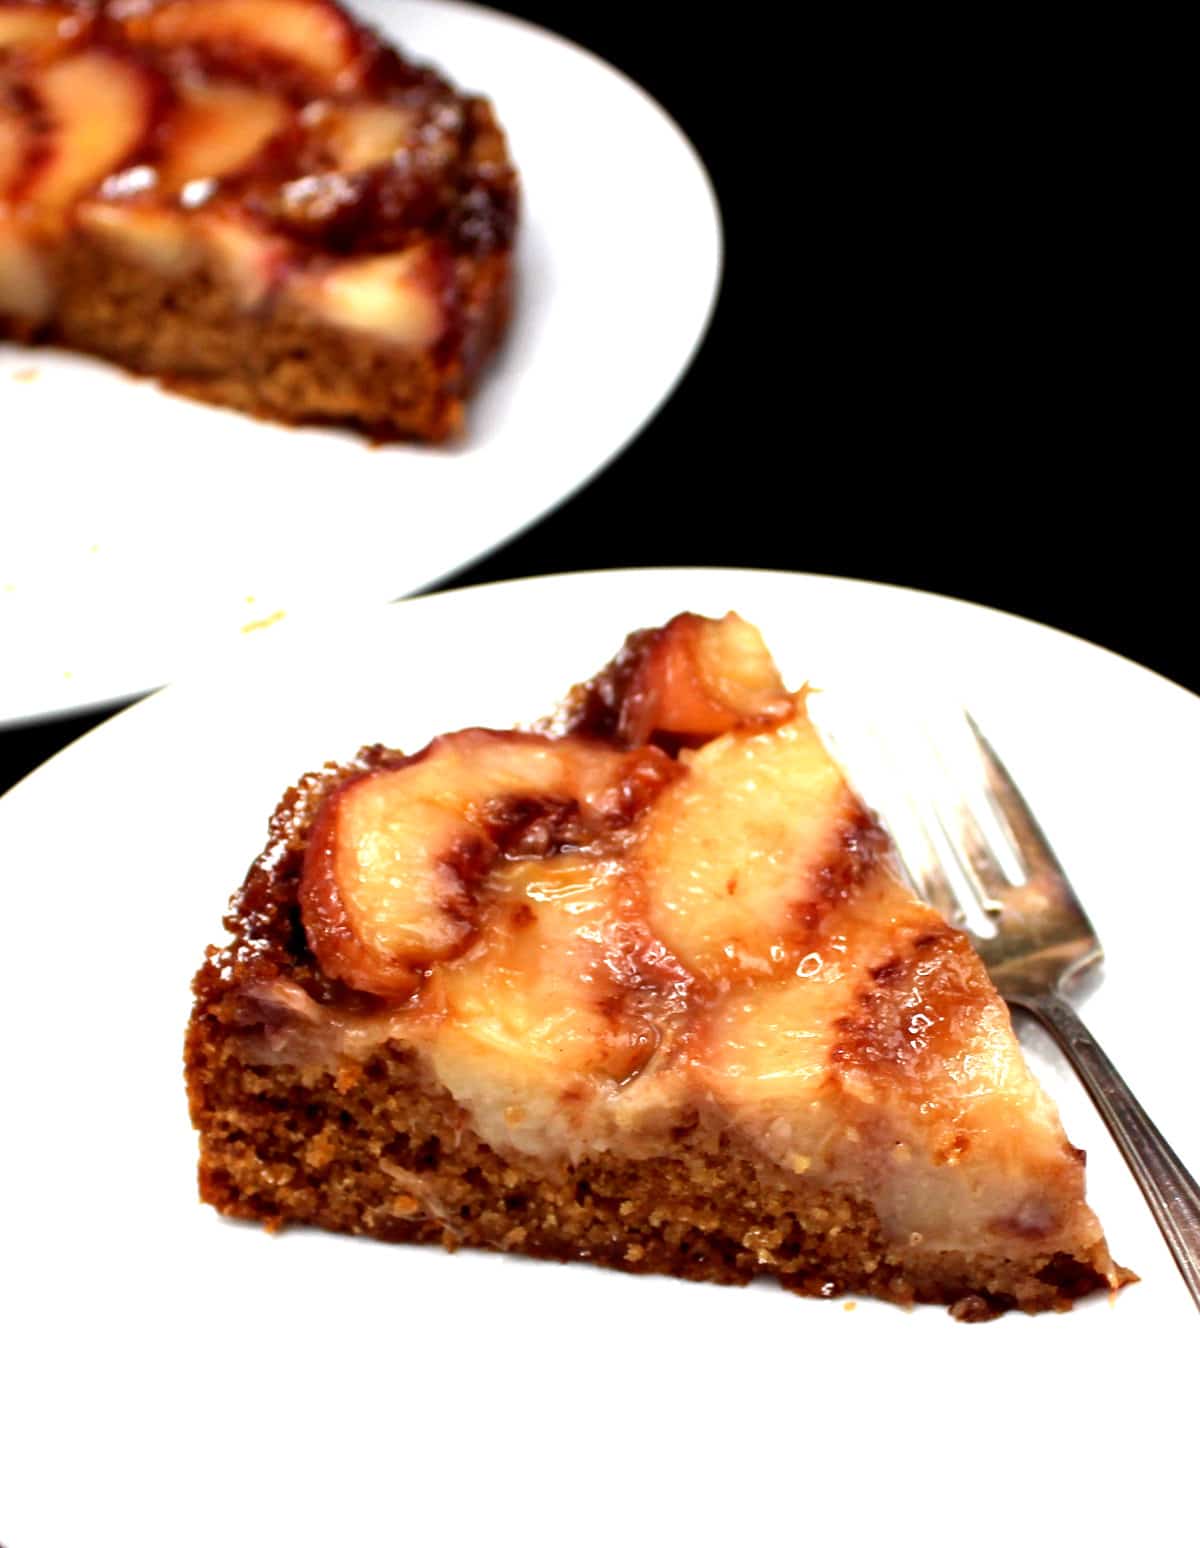 Slice of vegan peach upside down cake in white plate with fork.